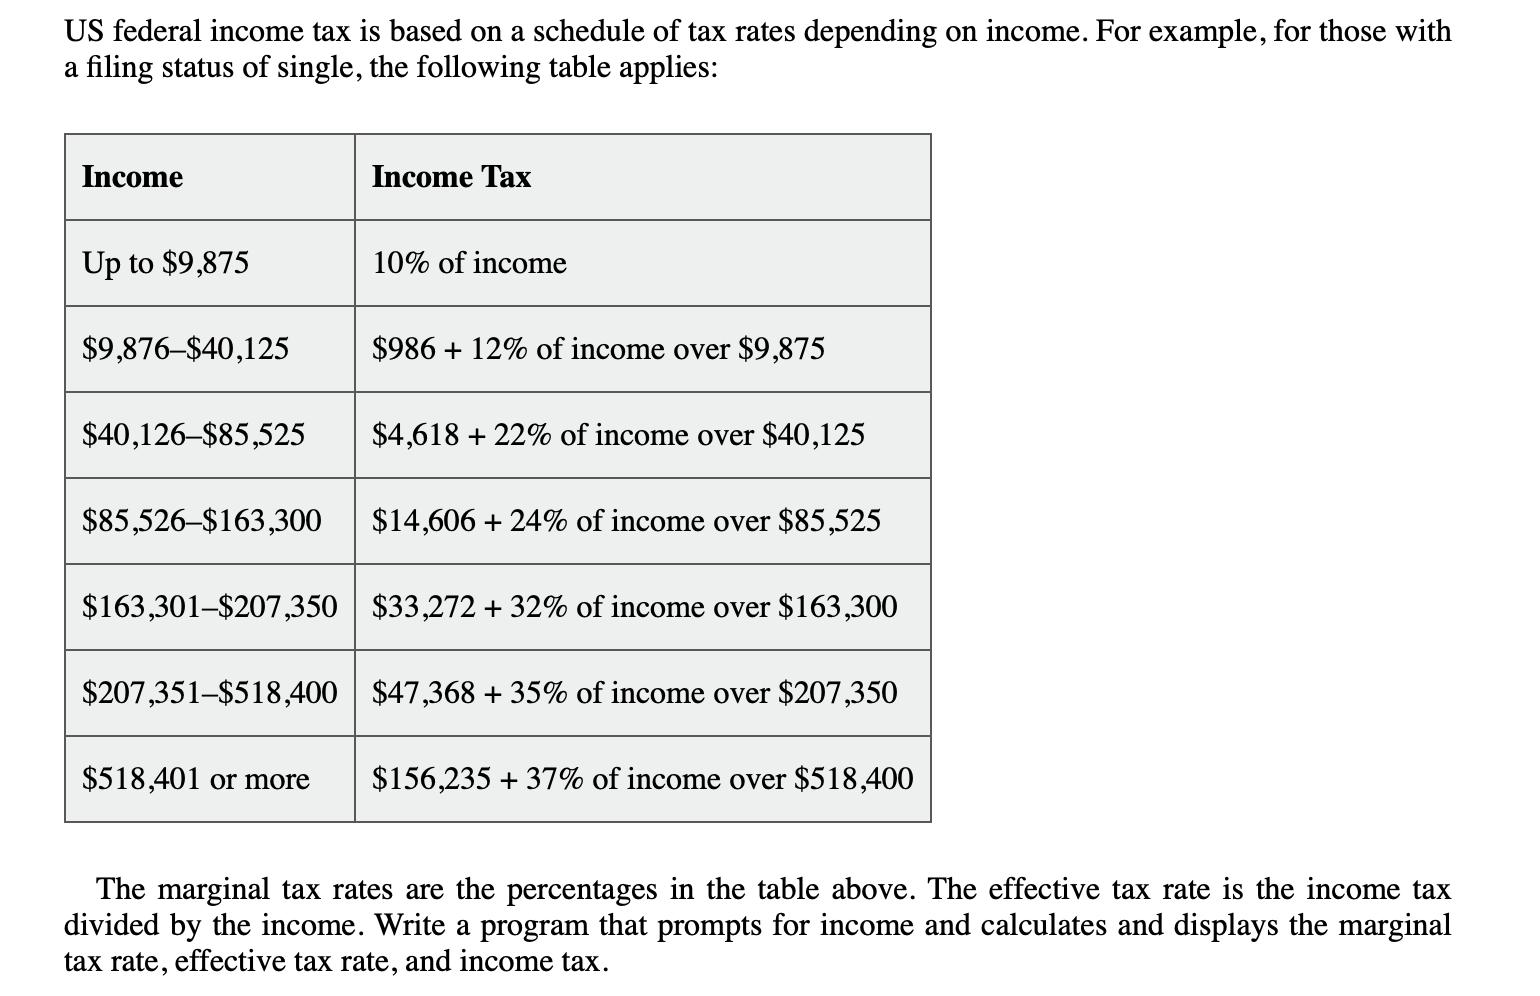 US federal income tax is based on a schedule of tax rates depending on income. For example, for those with a